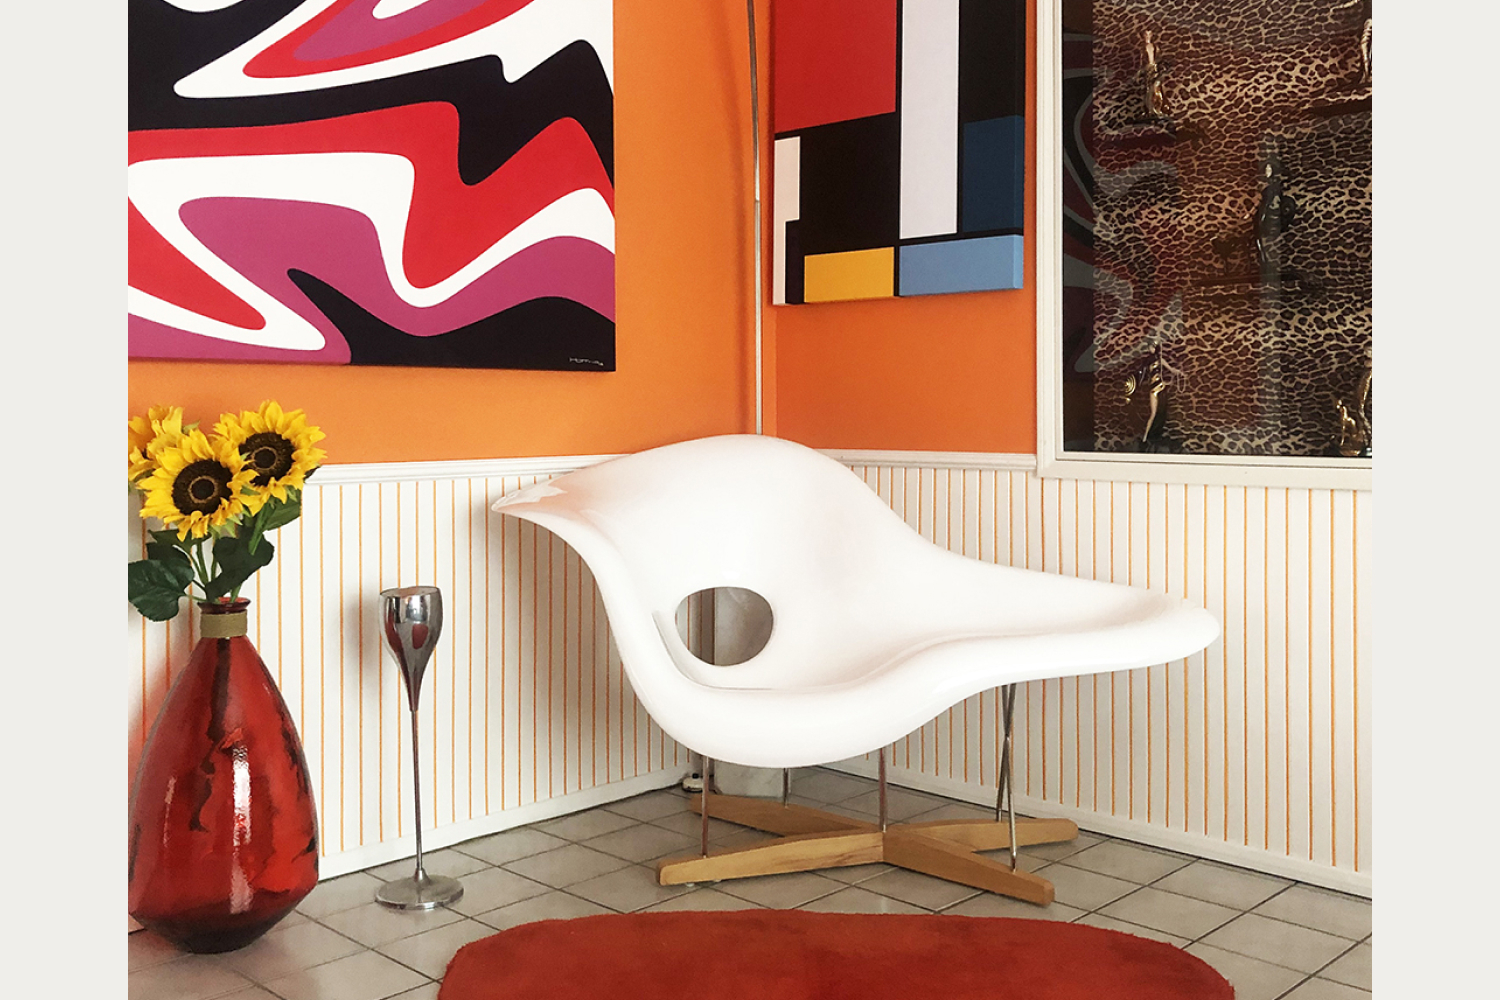 La Chaise Chair is showcased amidst a vibrant array of colors in the surrounding environment.